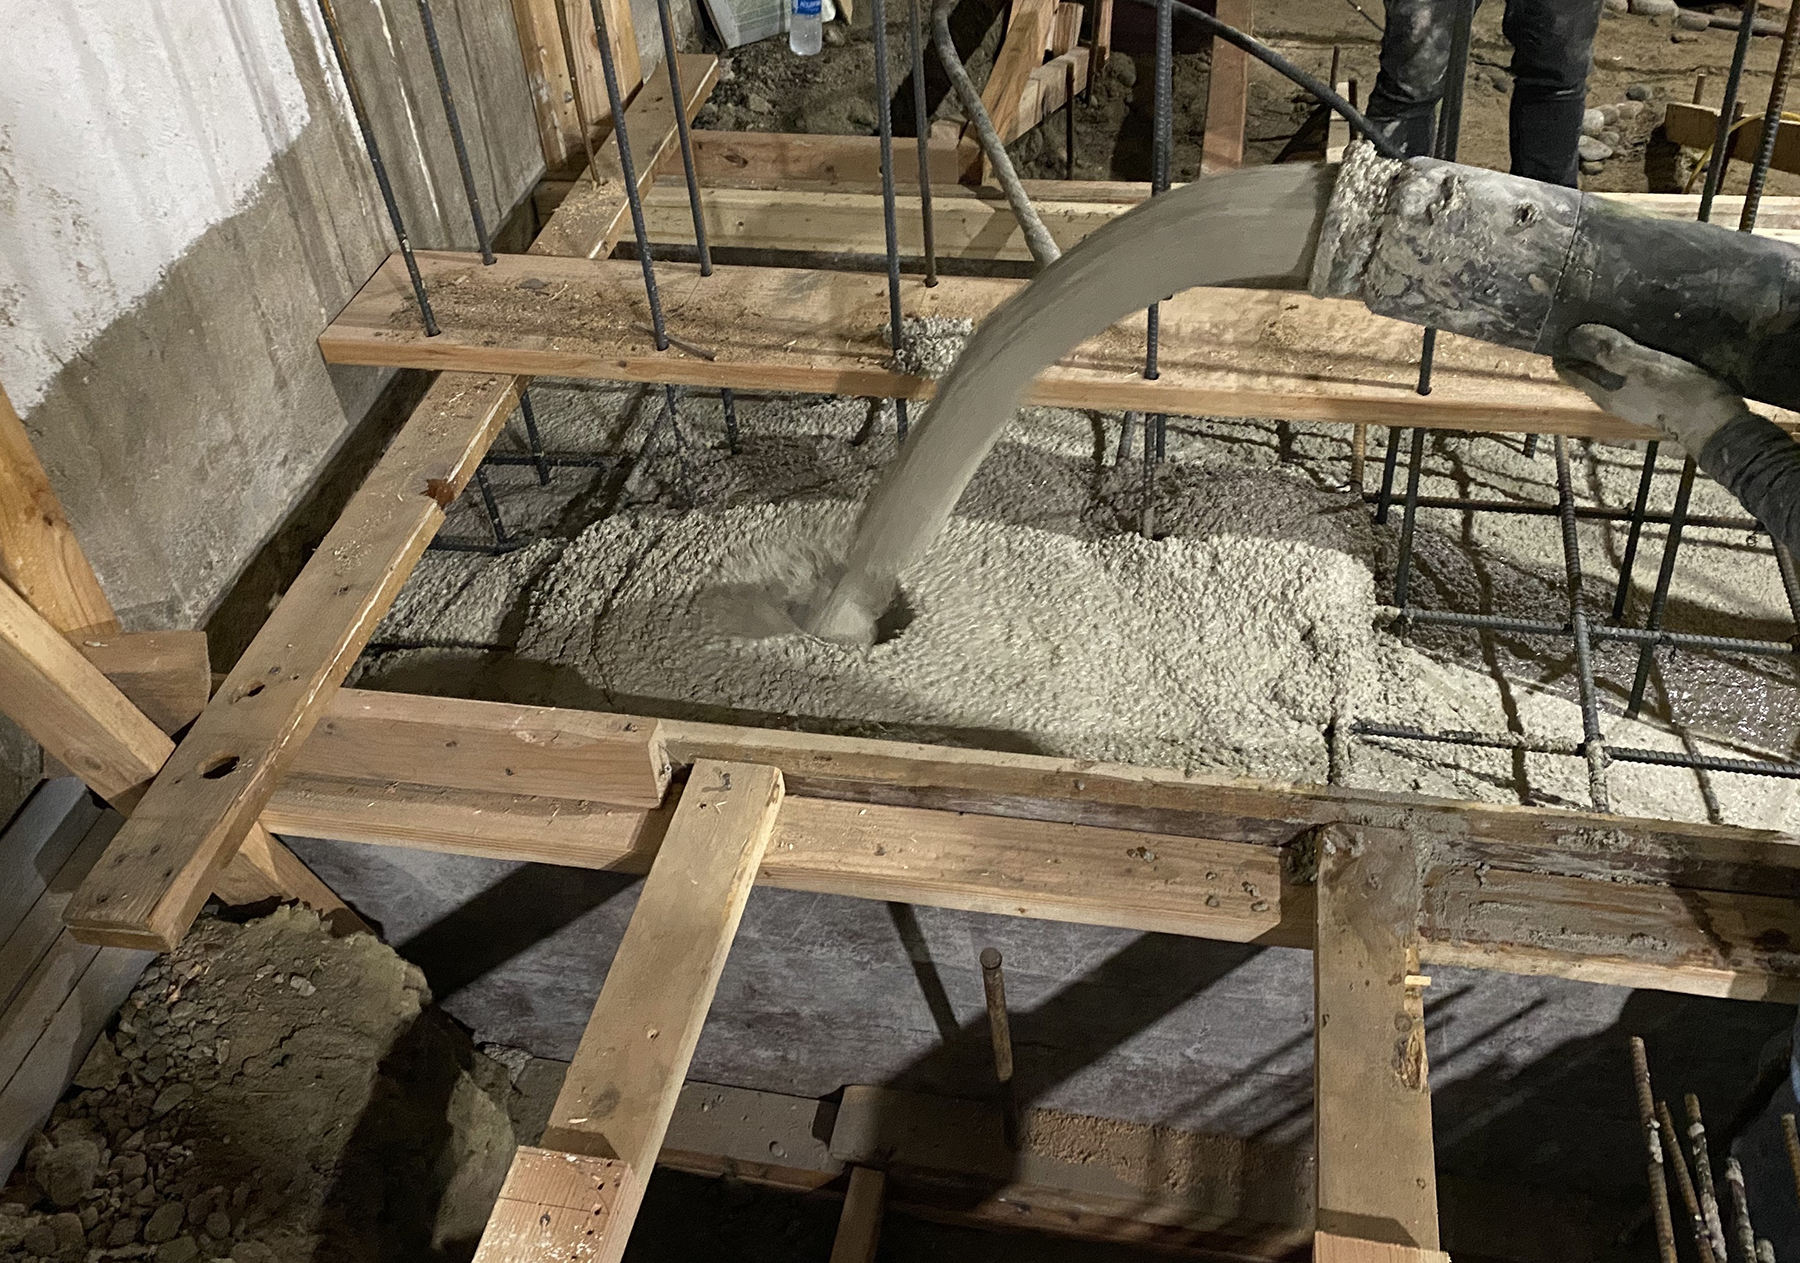 C-Crete, a portland-cement-free concrete that is workable and has great flowability for construction projects, is being placed in a building foundation in Seattle. (Image courtesy of R. Savary, C-Crete Technologies)